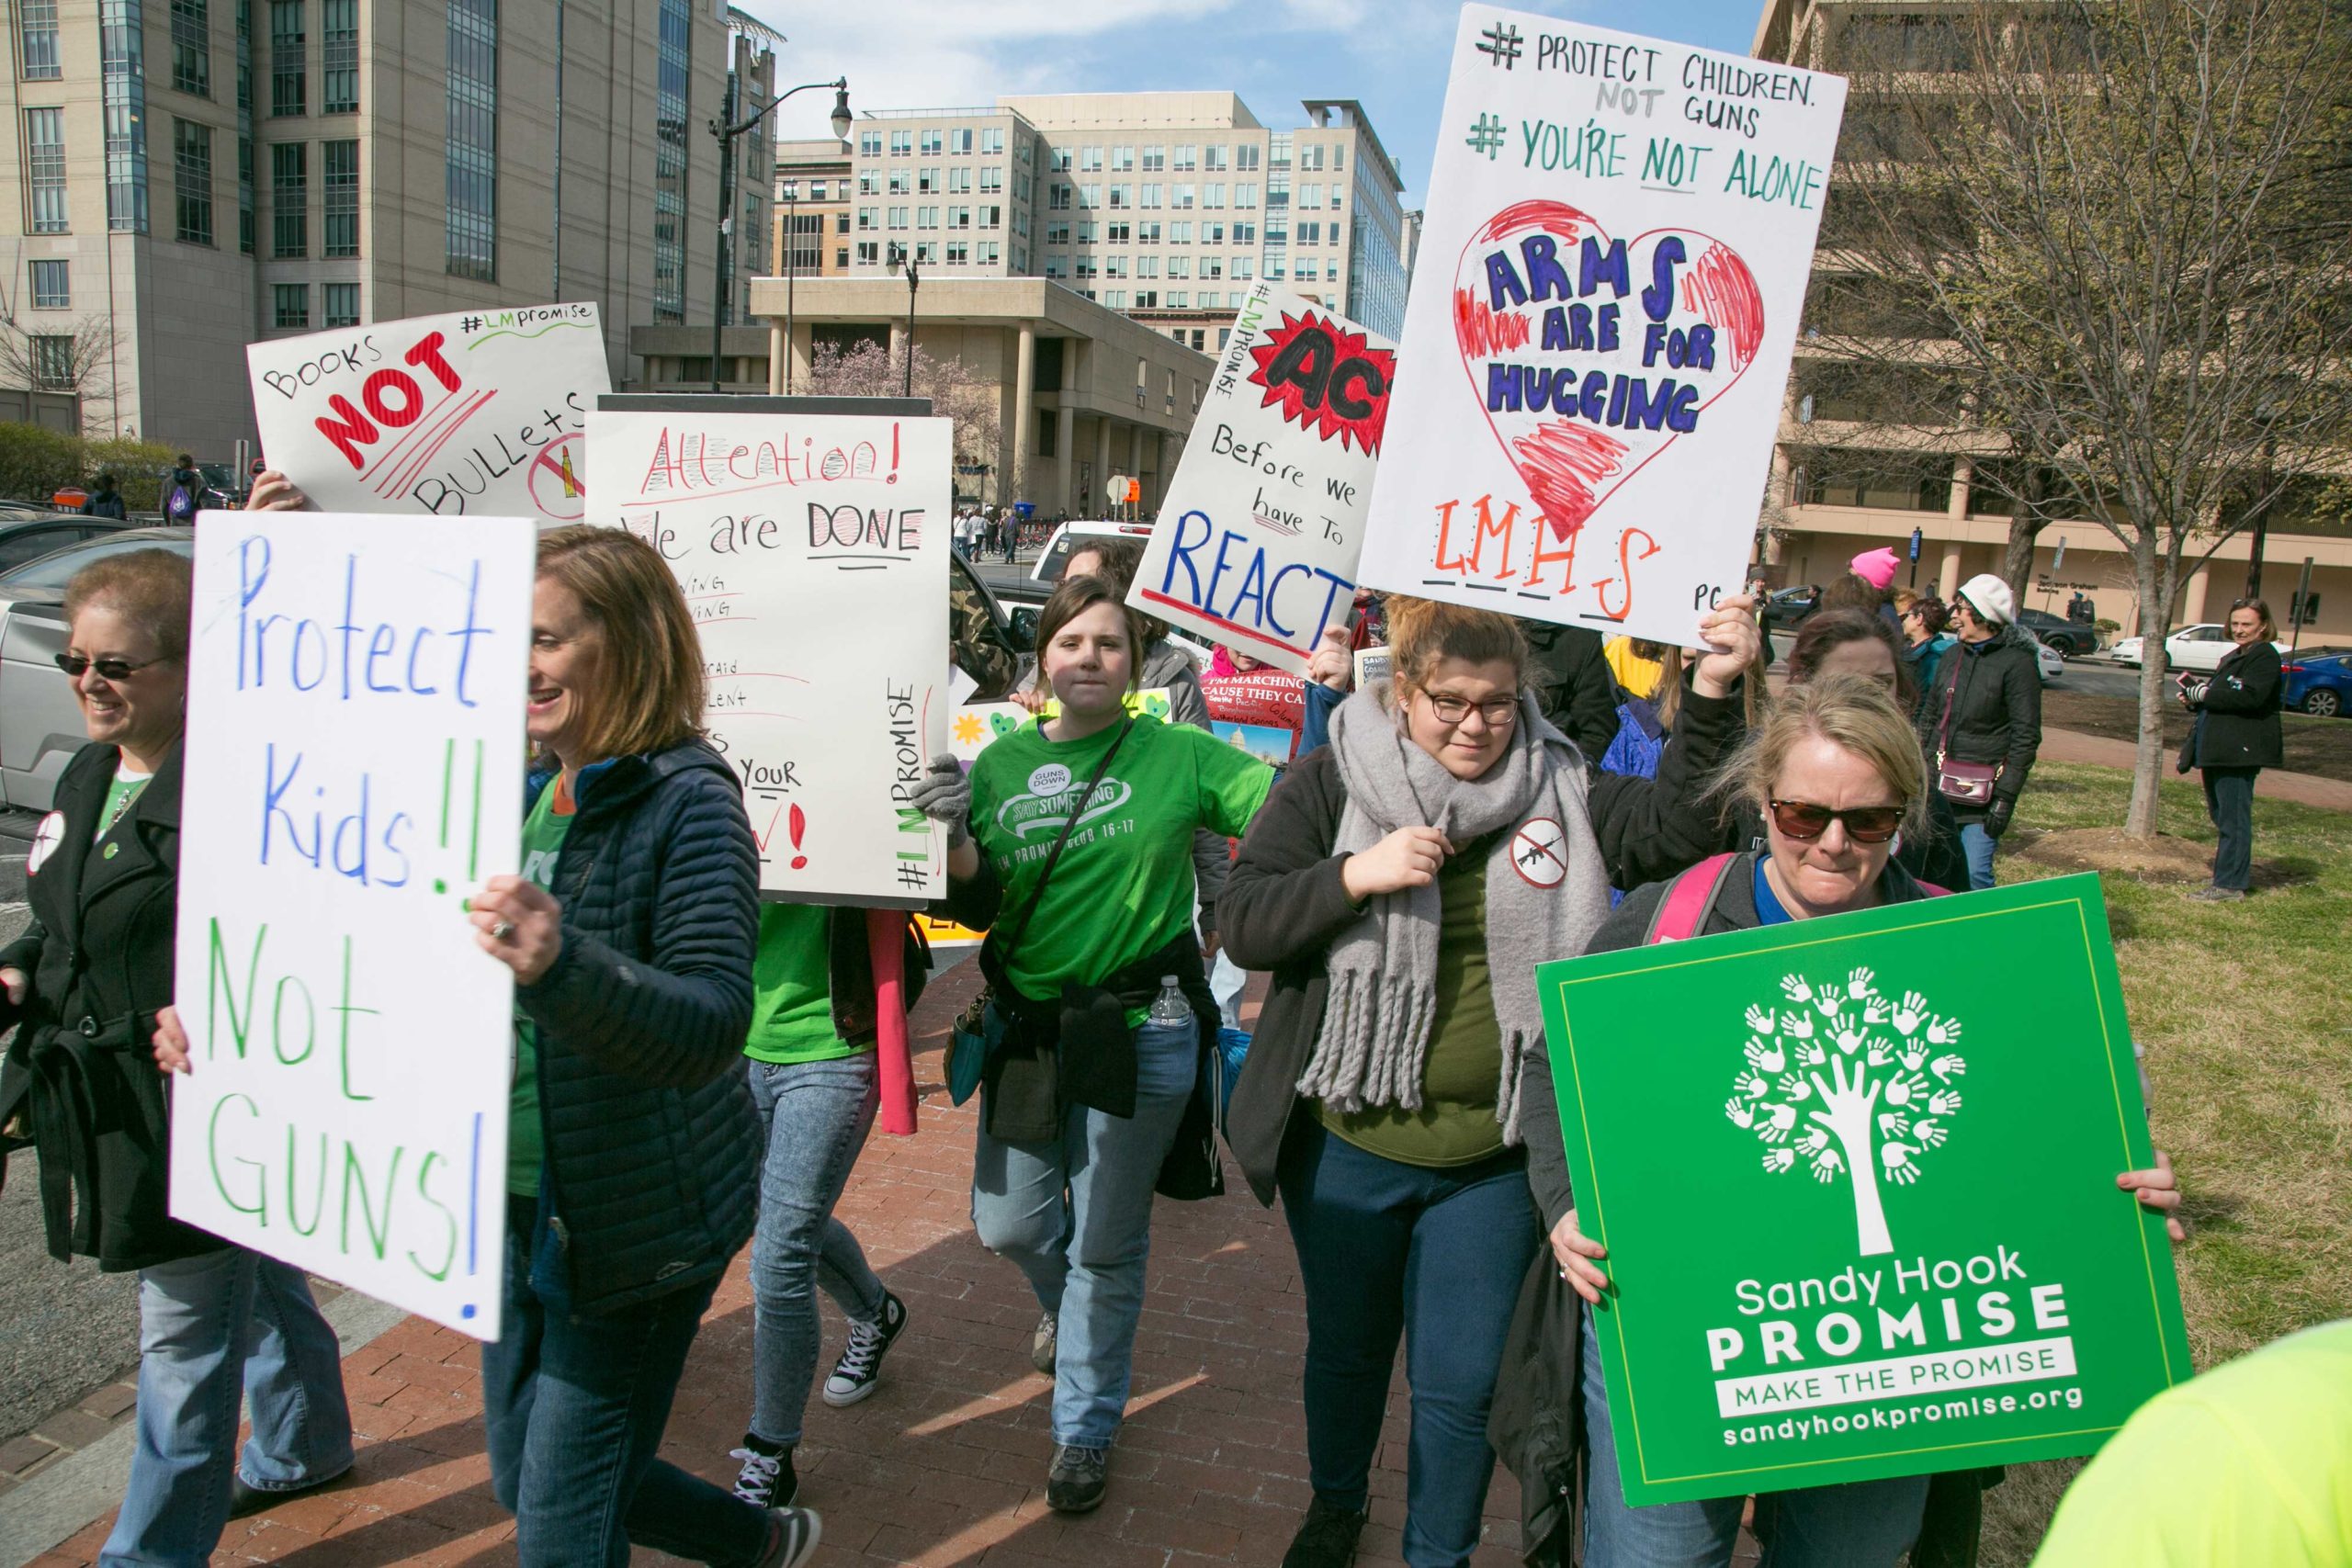 Volunteers and supporters with Sandy Hook Promise participate in the 2018 Marach For Our Lives in Washington, D.C.